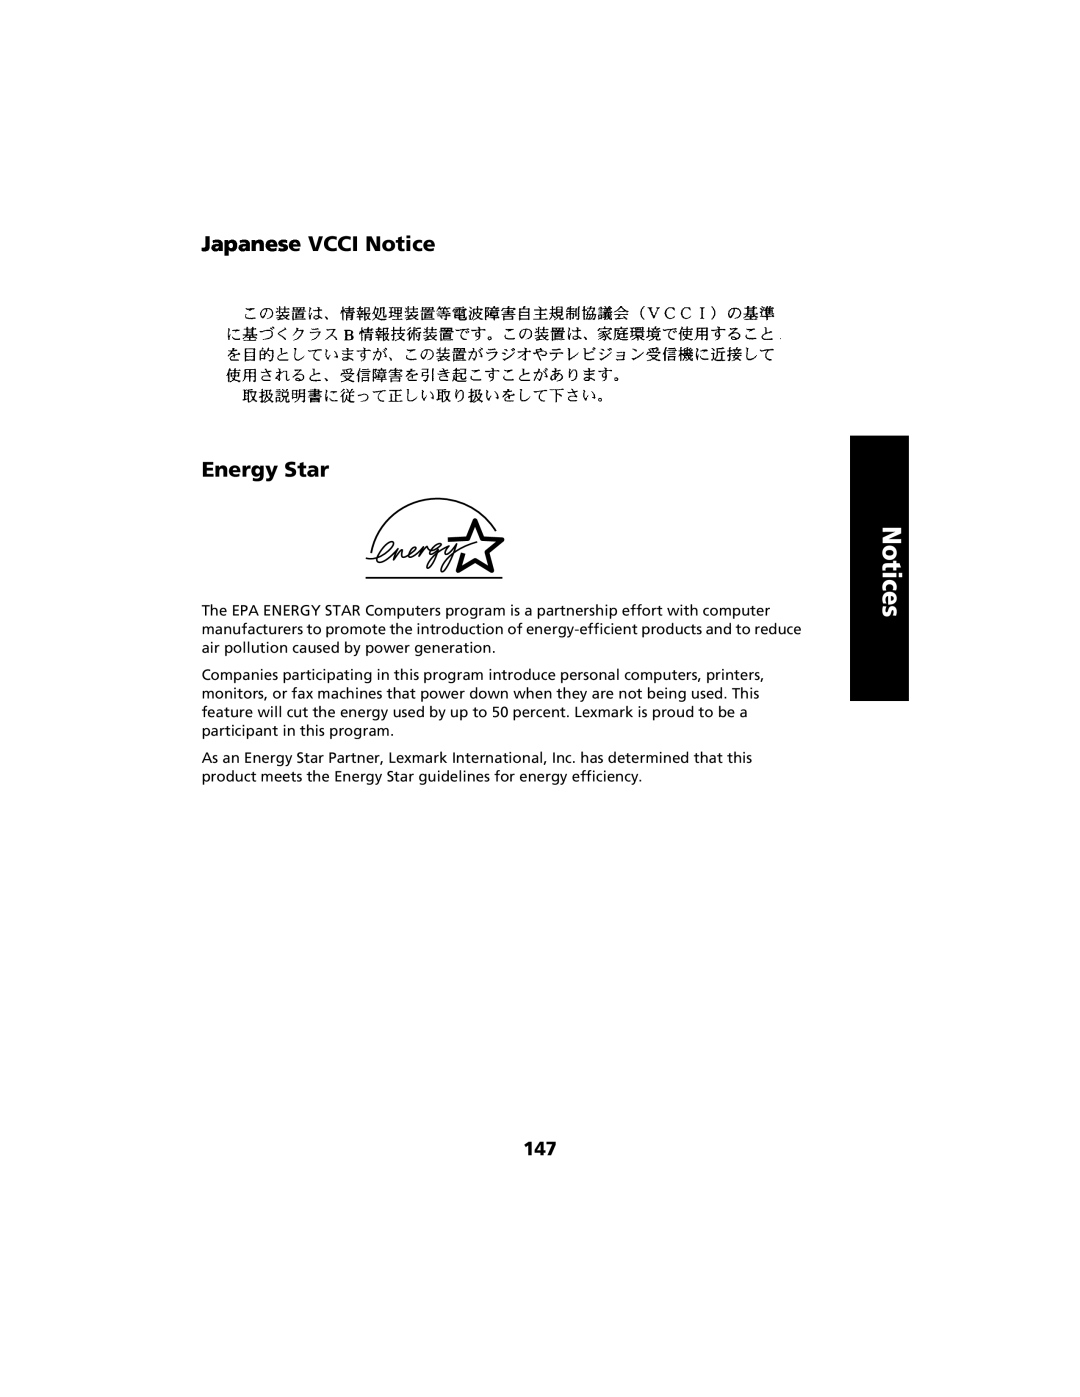 Lexmark 2480 manual Japanese VCCI Notice Energy Star, Notices 